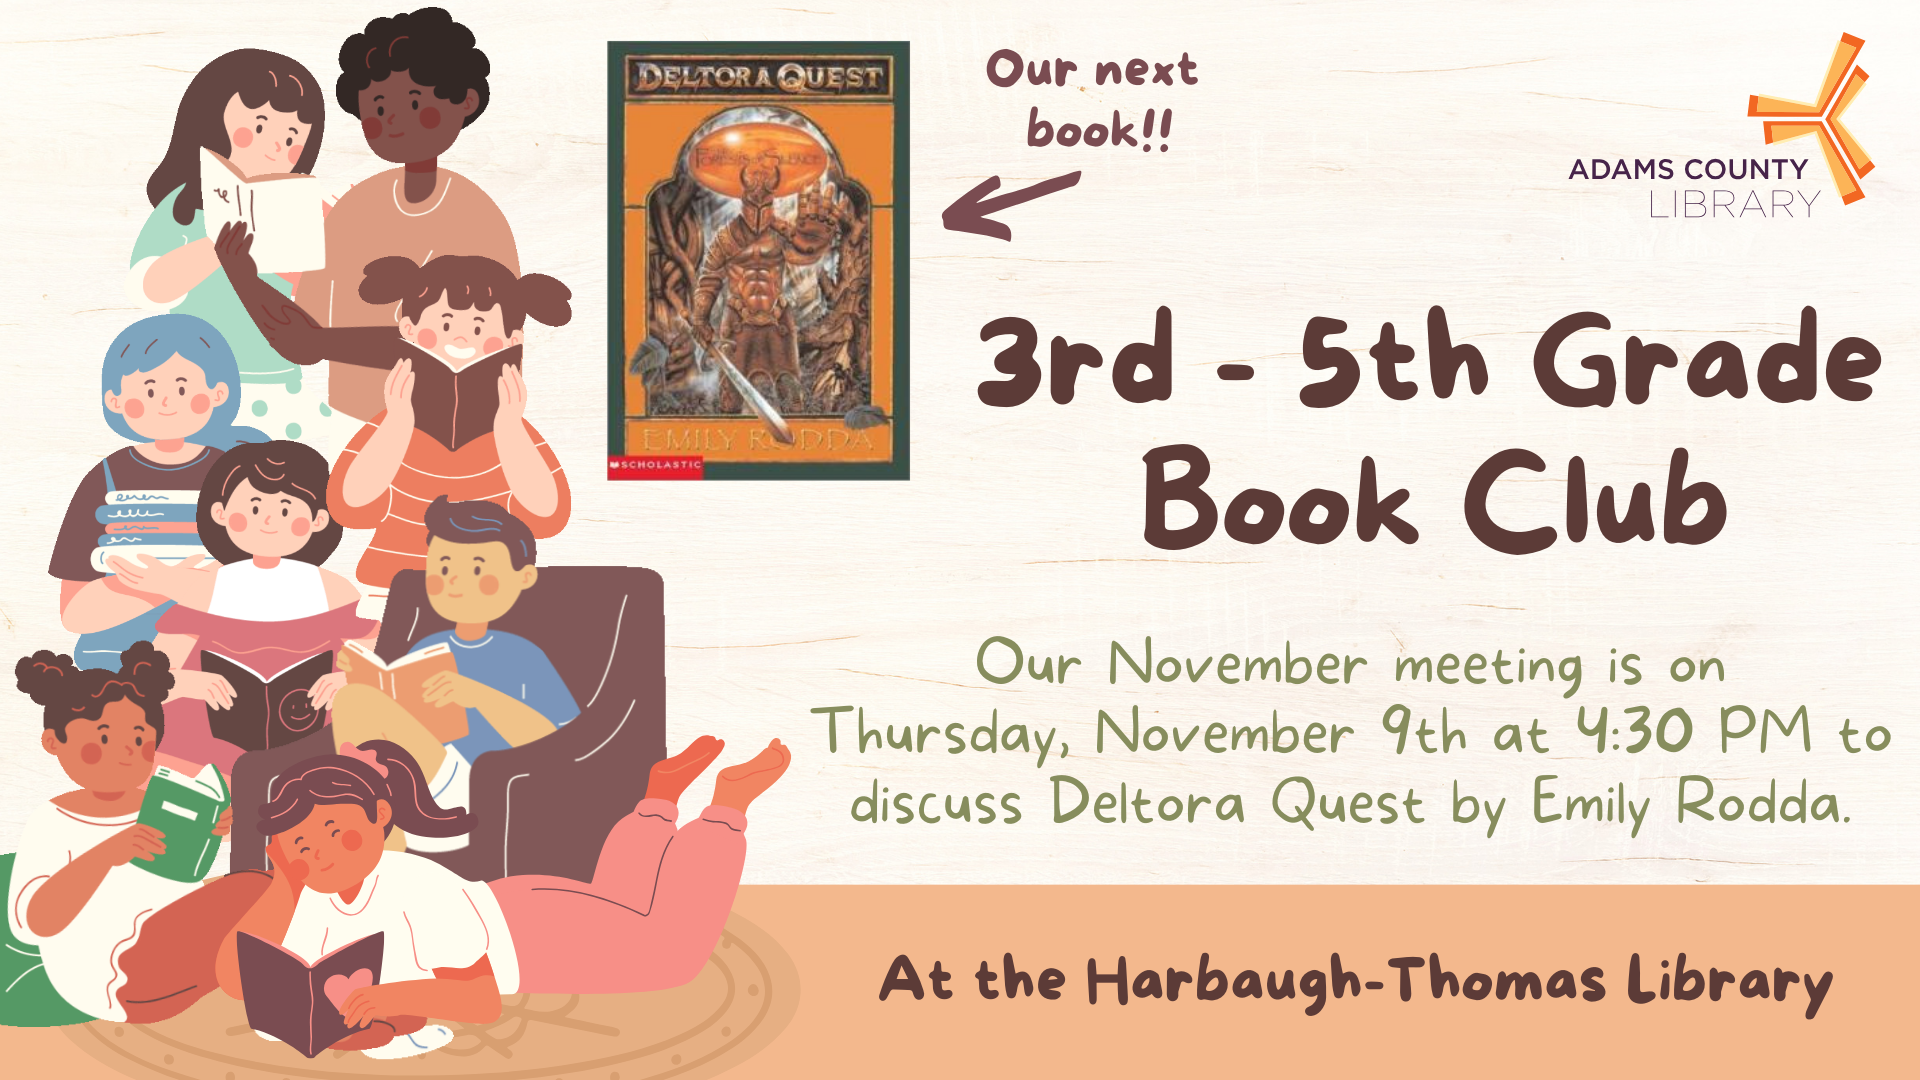 3rd-5th grade book club meeting November 9th at 4:30 PM to discuss Deltora Quest by Emily Rodda